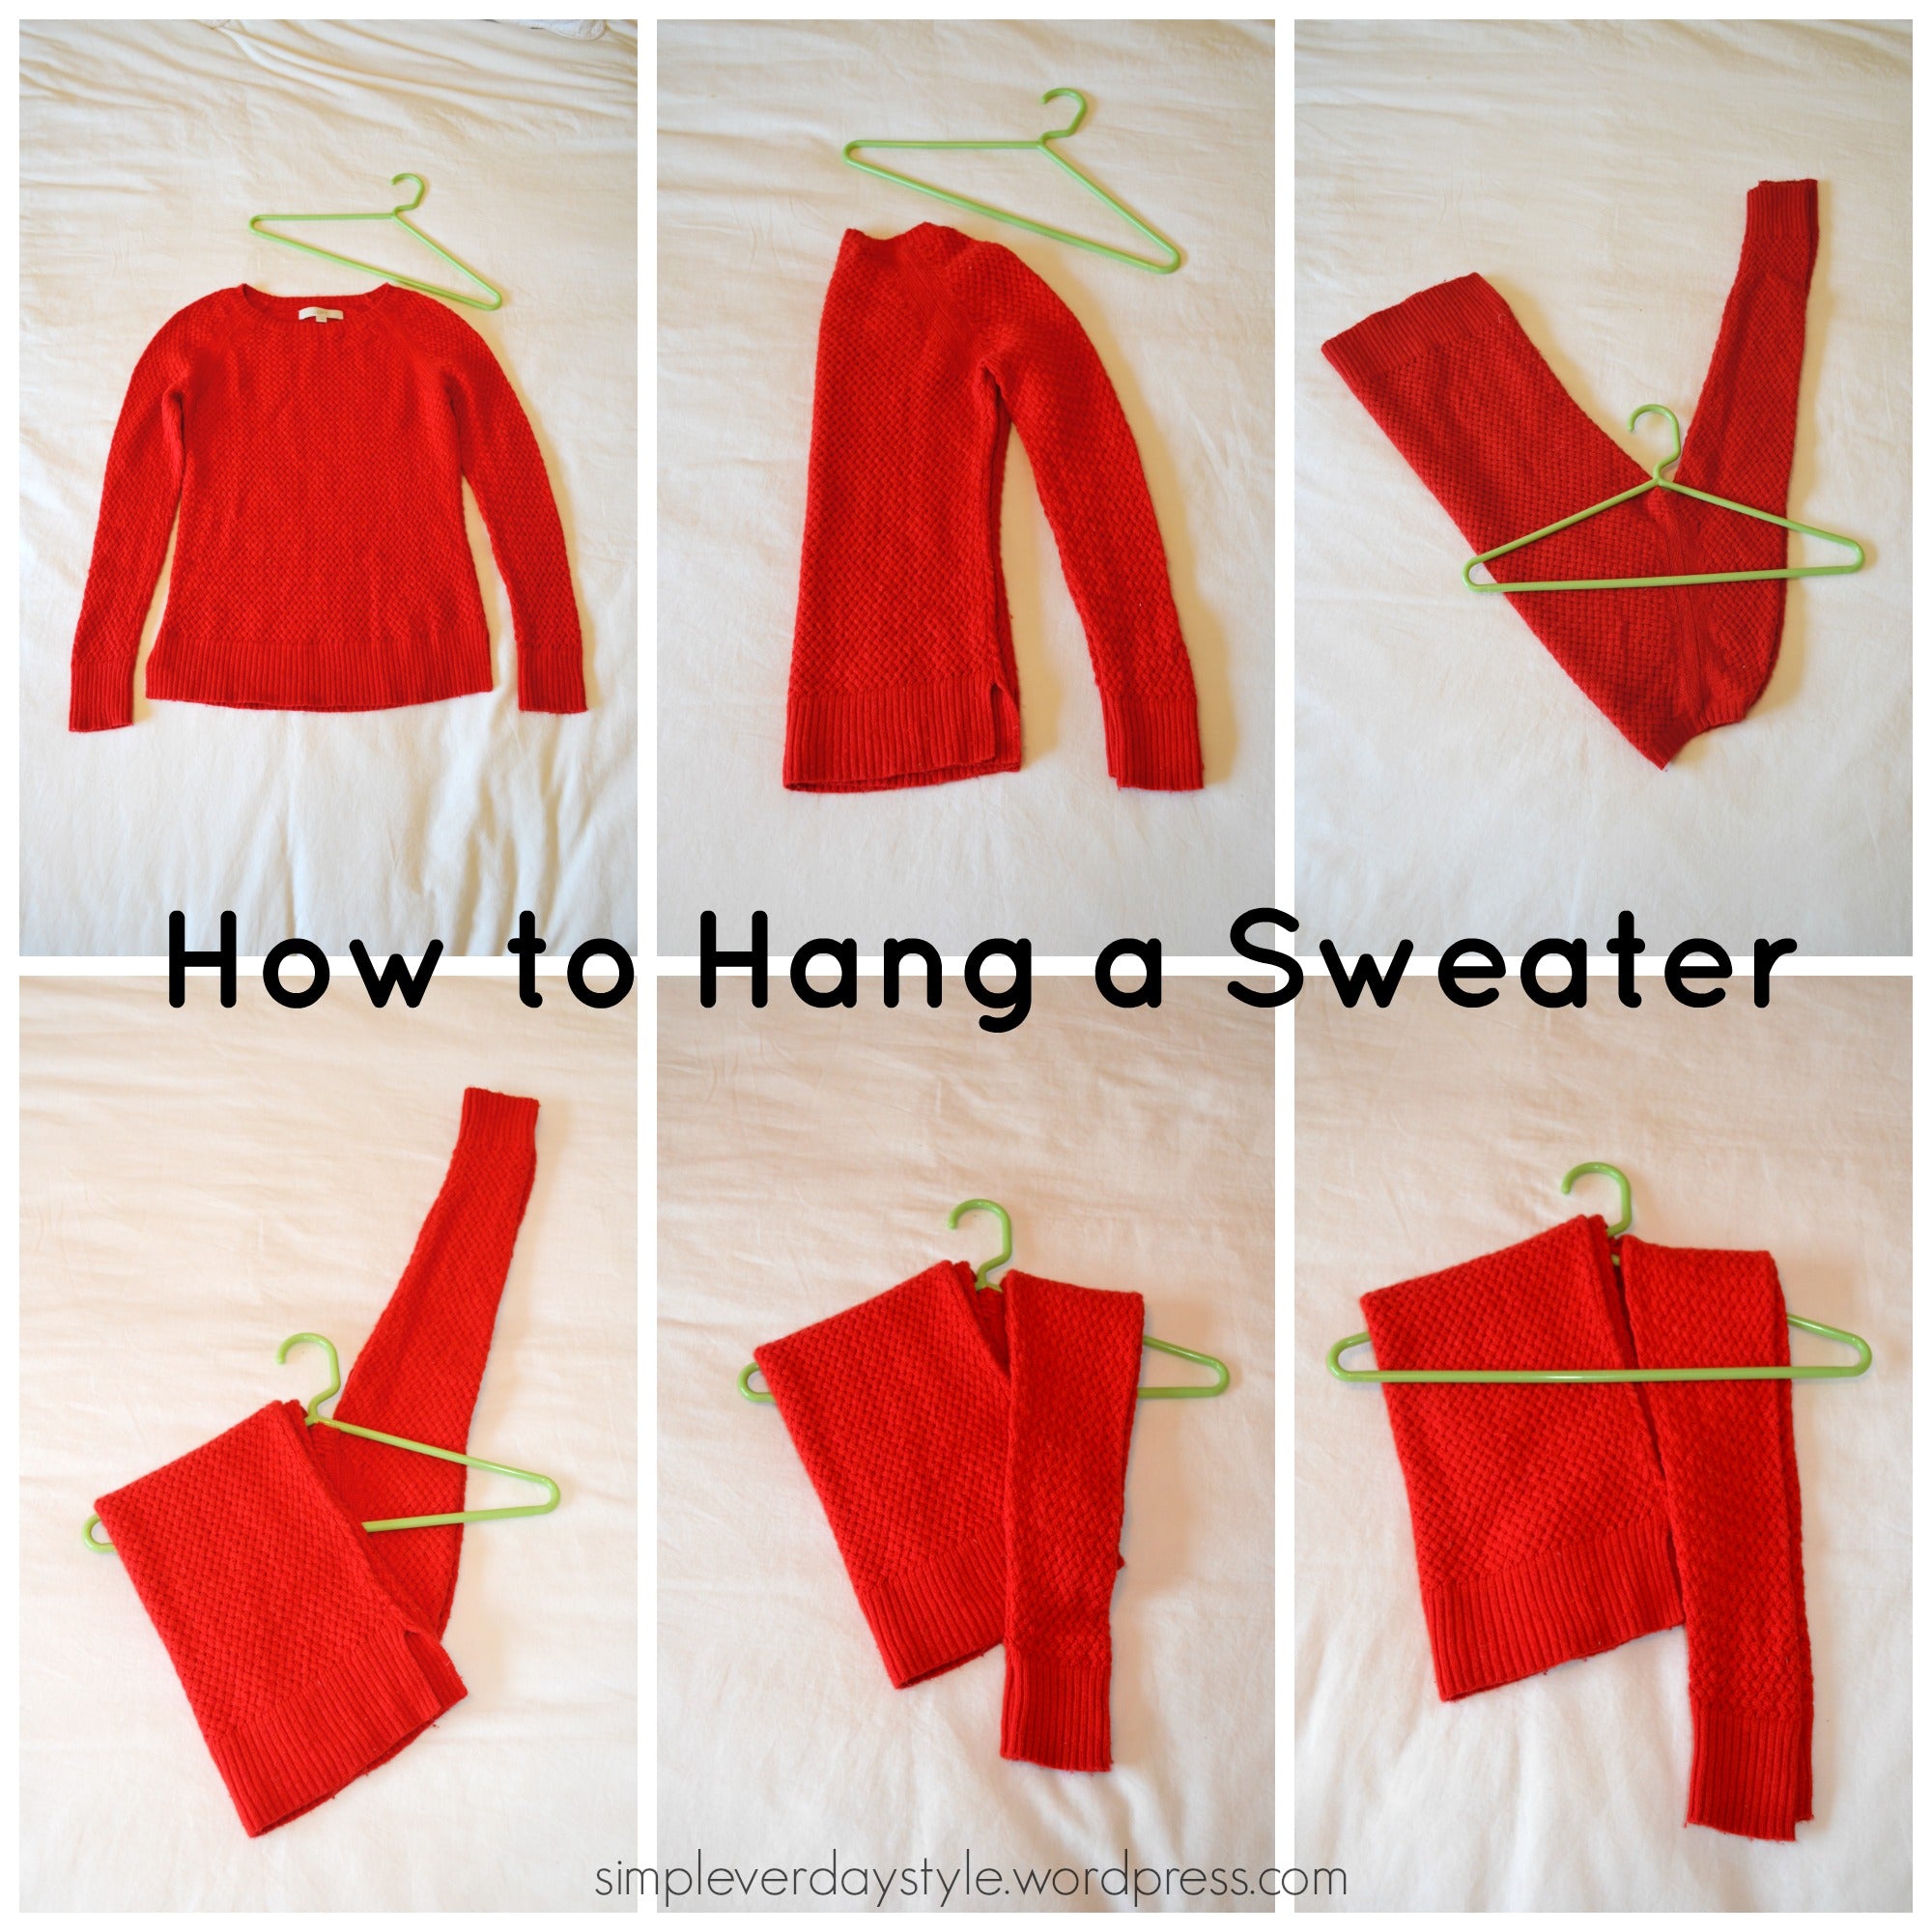 Should You Hang Up Sweaters?